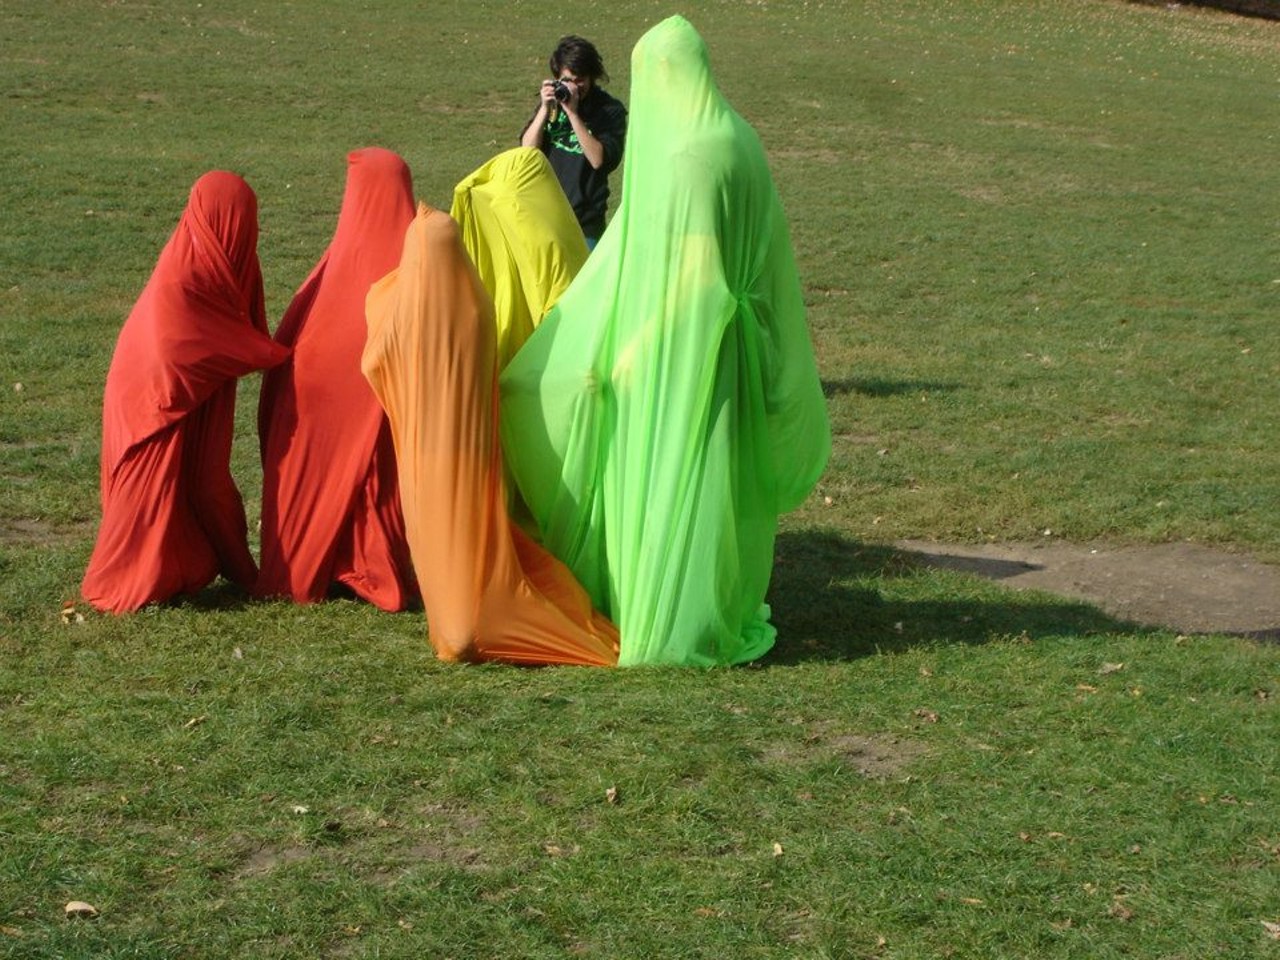 The Cocoon Project creates interactive performance art and colorful temporary installations with a hand-crafted fabric Cocoon.
Clark Park 1130 Clark St, Detroit 
Saturday August 10 12pm to 6pm